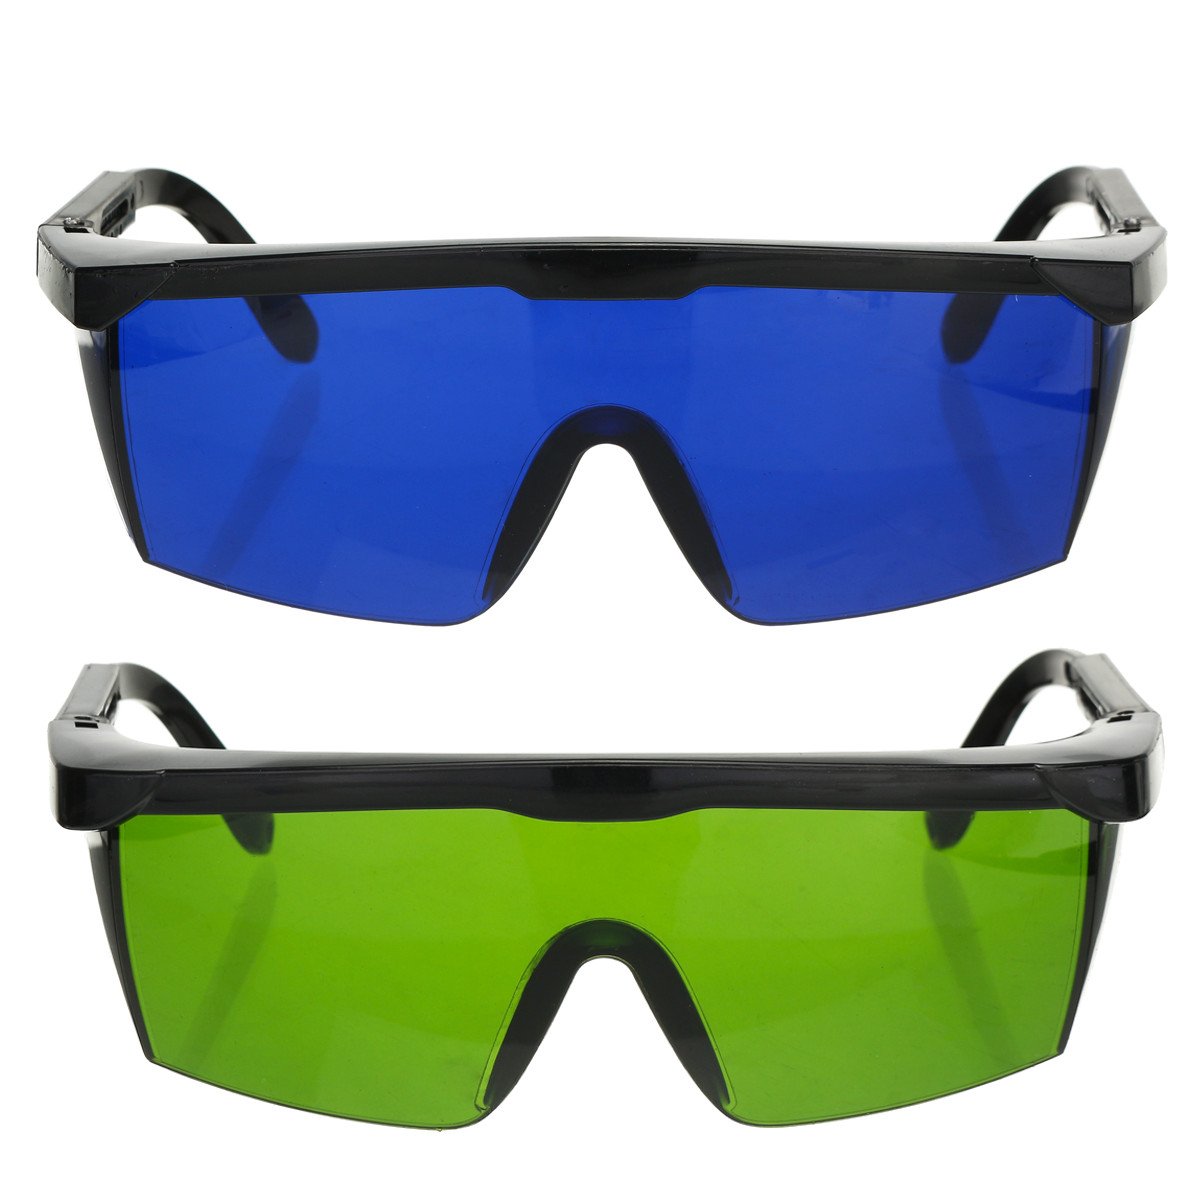 Pro Laser Protection Goggles Protective Safety Glasses IPL OD+4D 190nm-2000nm Laser Goggles 1